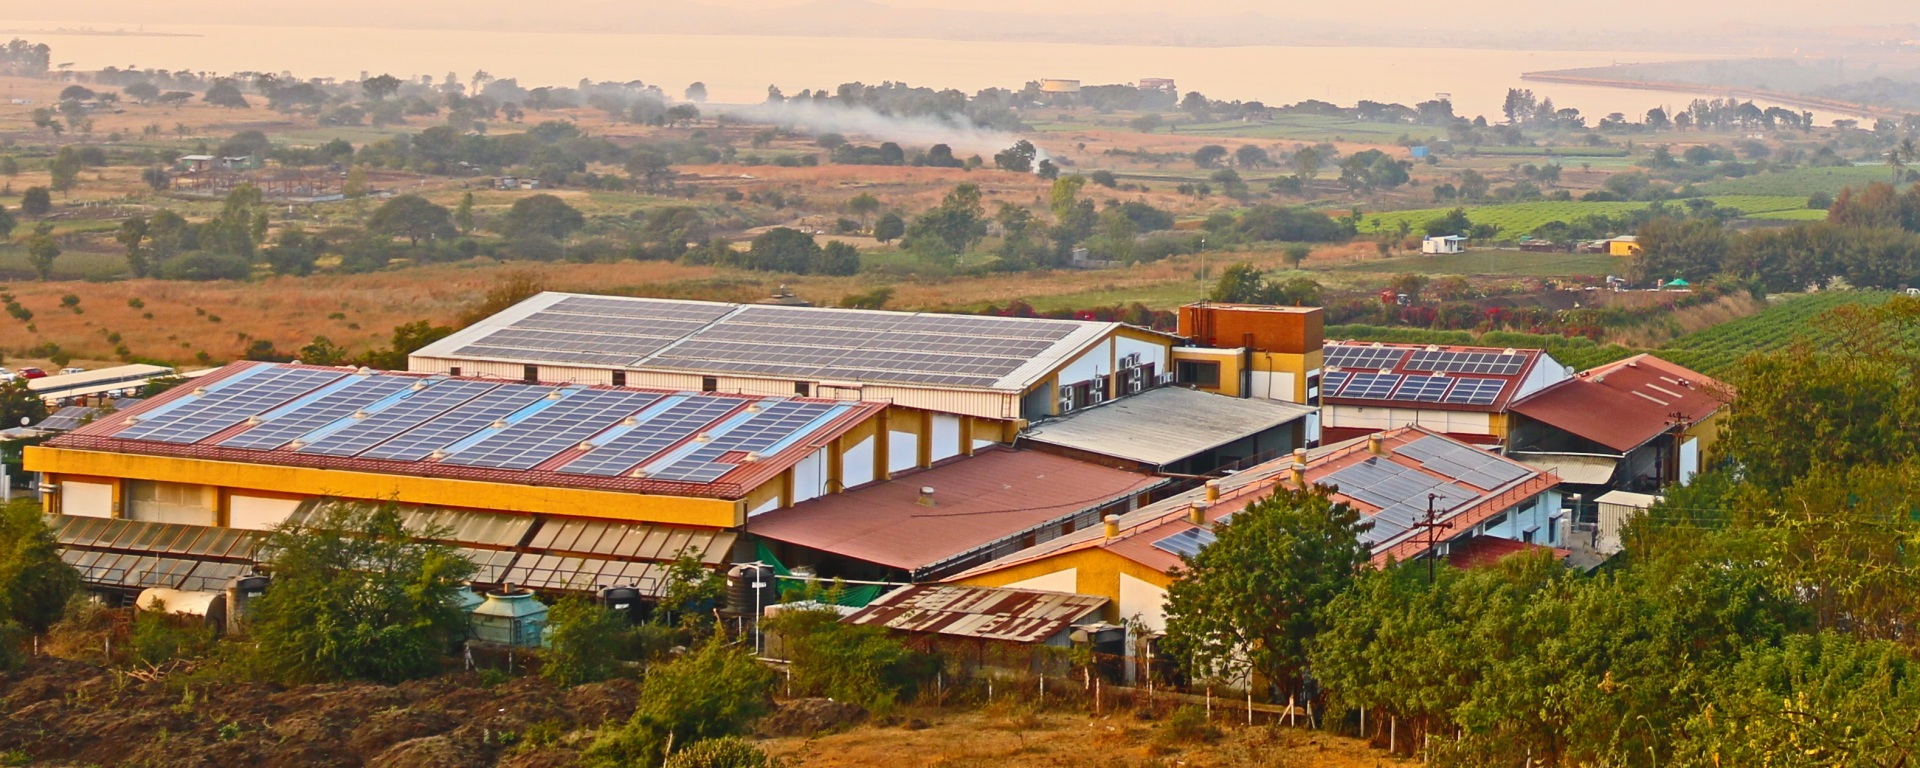 Solar Panels on all the roof tops of Sula